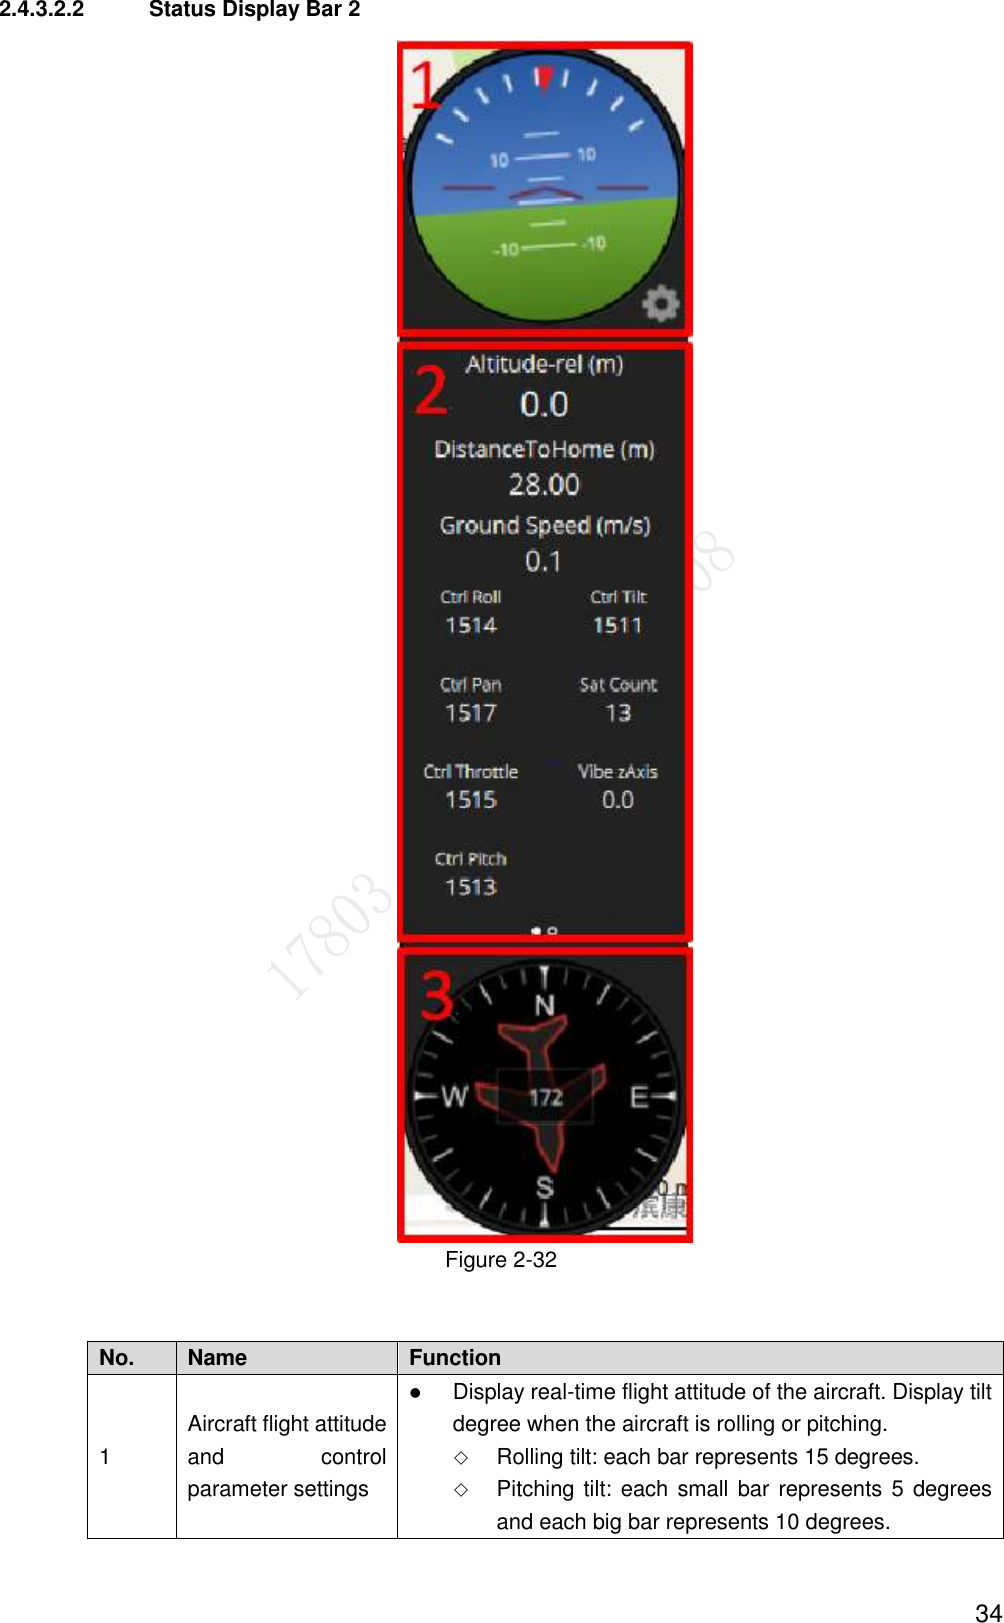  34 2.4.3.2.2  Status Display Bar 2  Figure 2-32   No. Name   Function   1 Aircraft flight attitude and  control parameter settings  Display real-time flight attitude of the aircraft. Display tilt degree when the aircraft is rolling or pitching.  Rolling tilt: each bar represents 15 degrees.    Pitching tilt: each small bar represents 5  degrees and each big bar represents 10 degrees. 